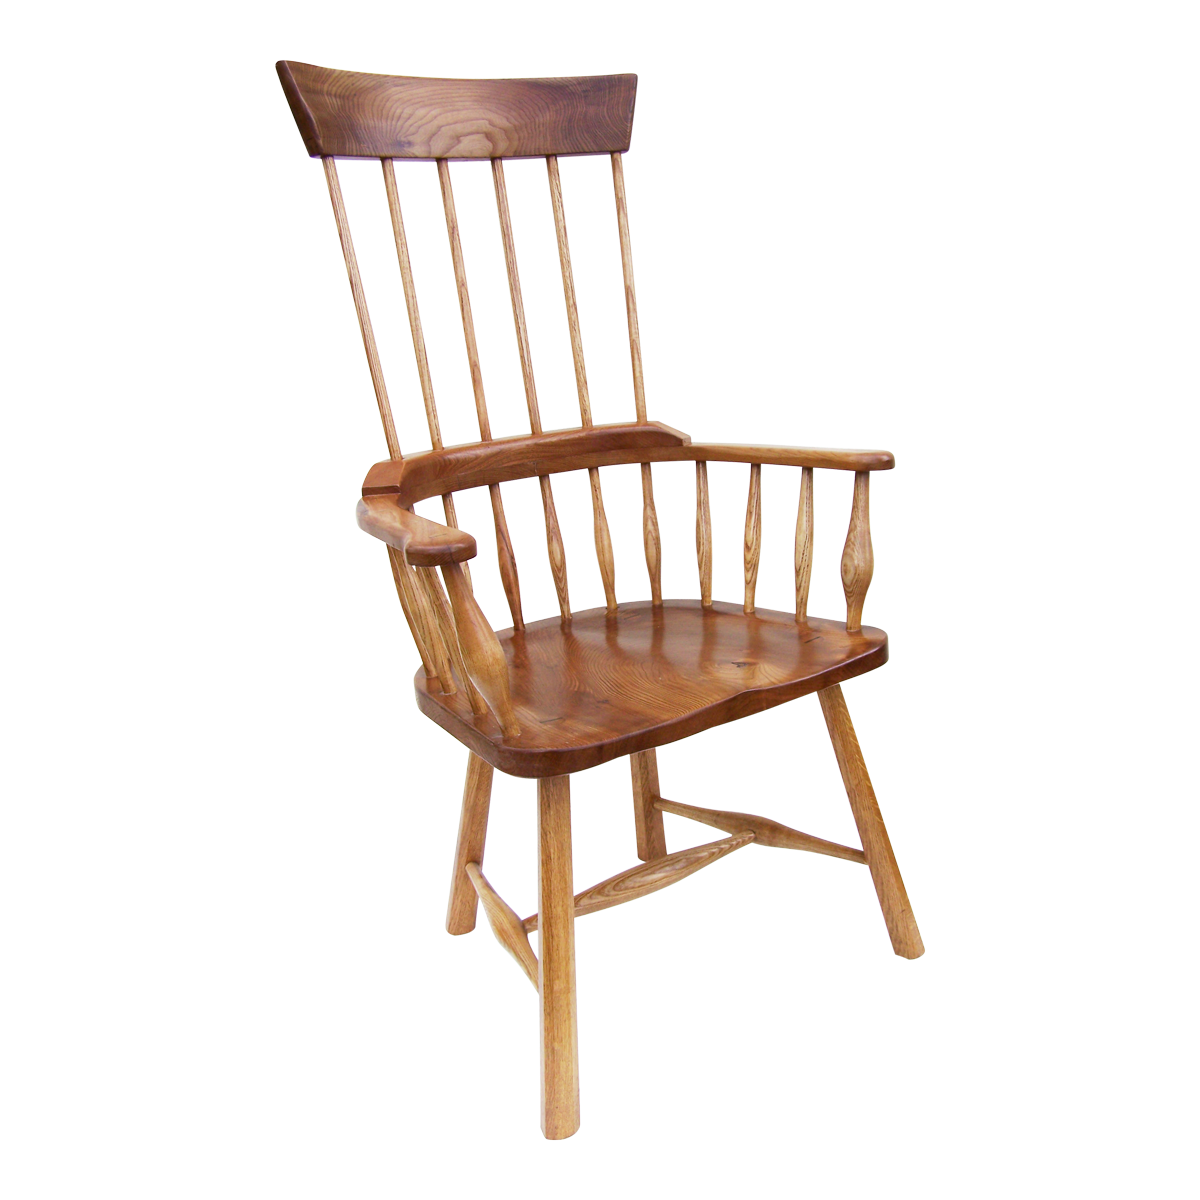 Curule Chair Picture HQ Image Free PNG PNG Image